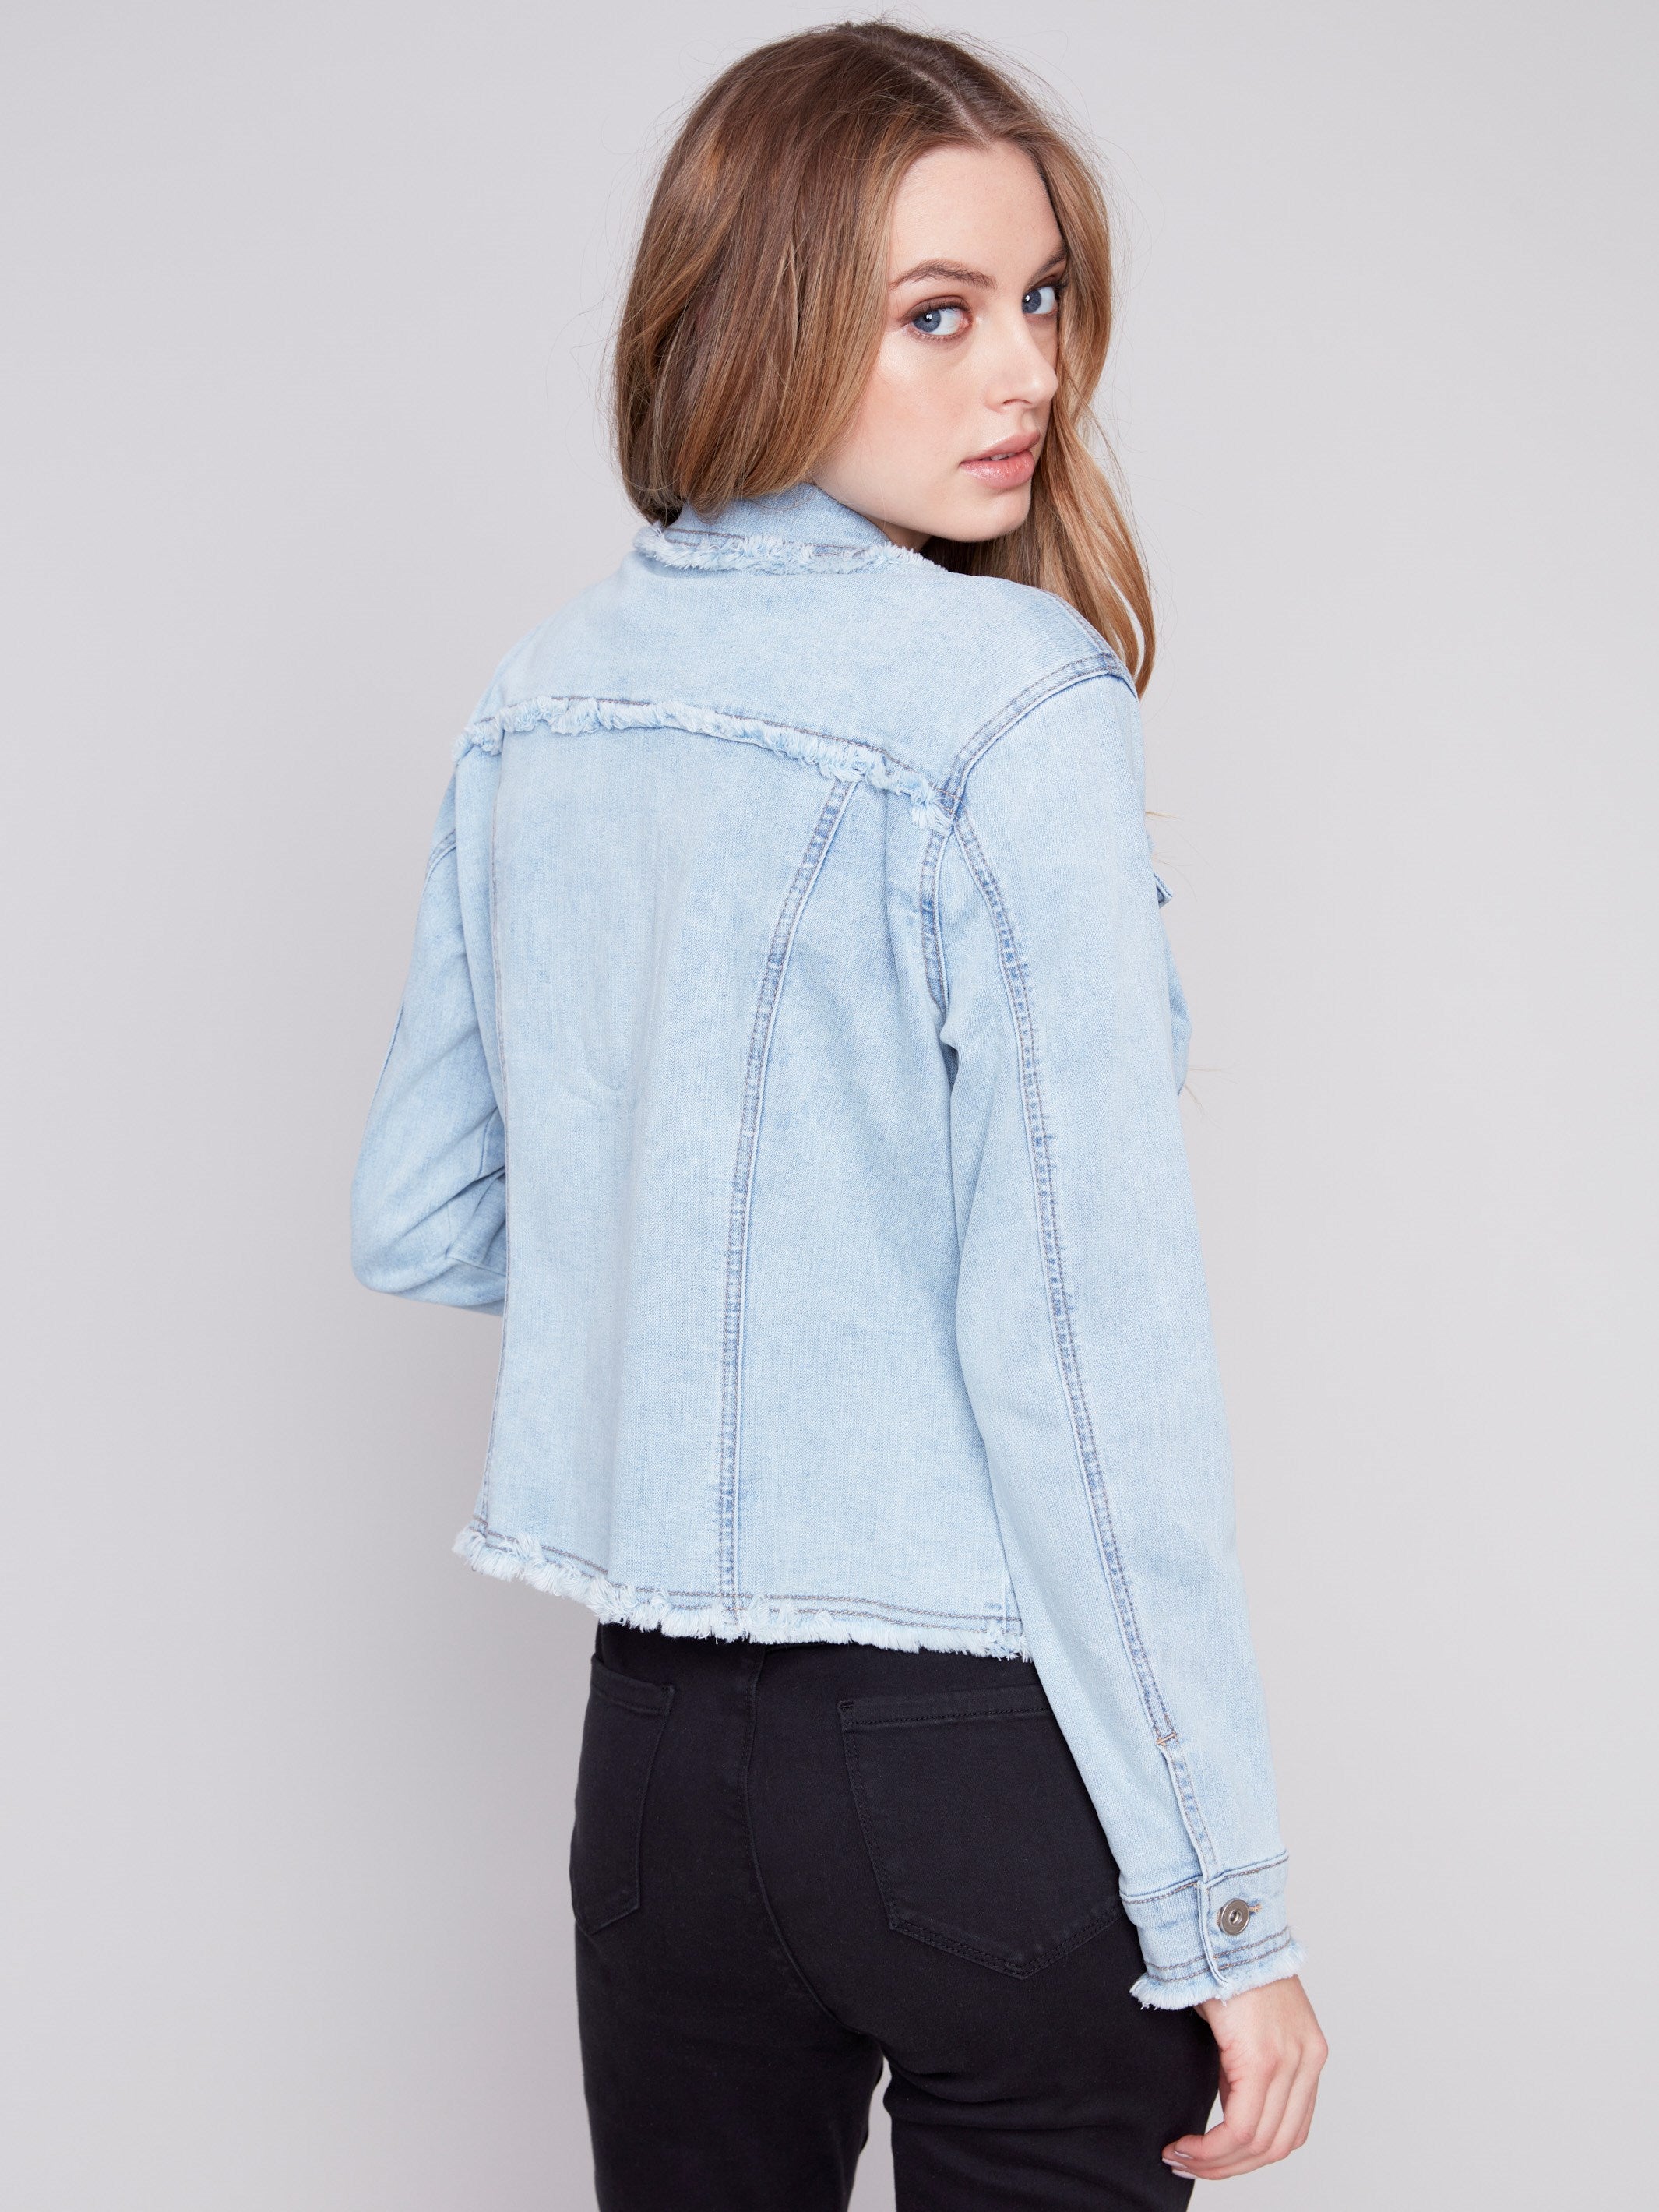 Jean Jacket with Frayed Edges - Bleach Blue - Charlie B Collection Canada - Image 2